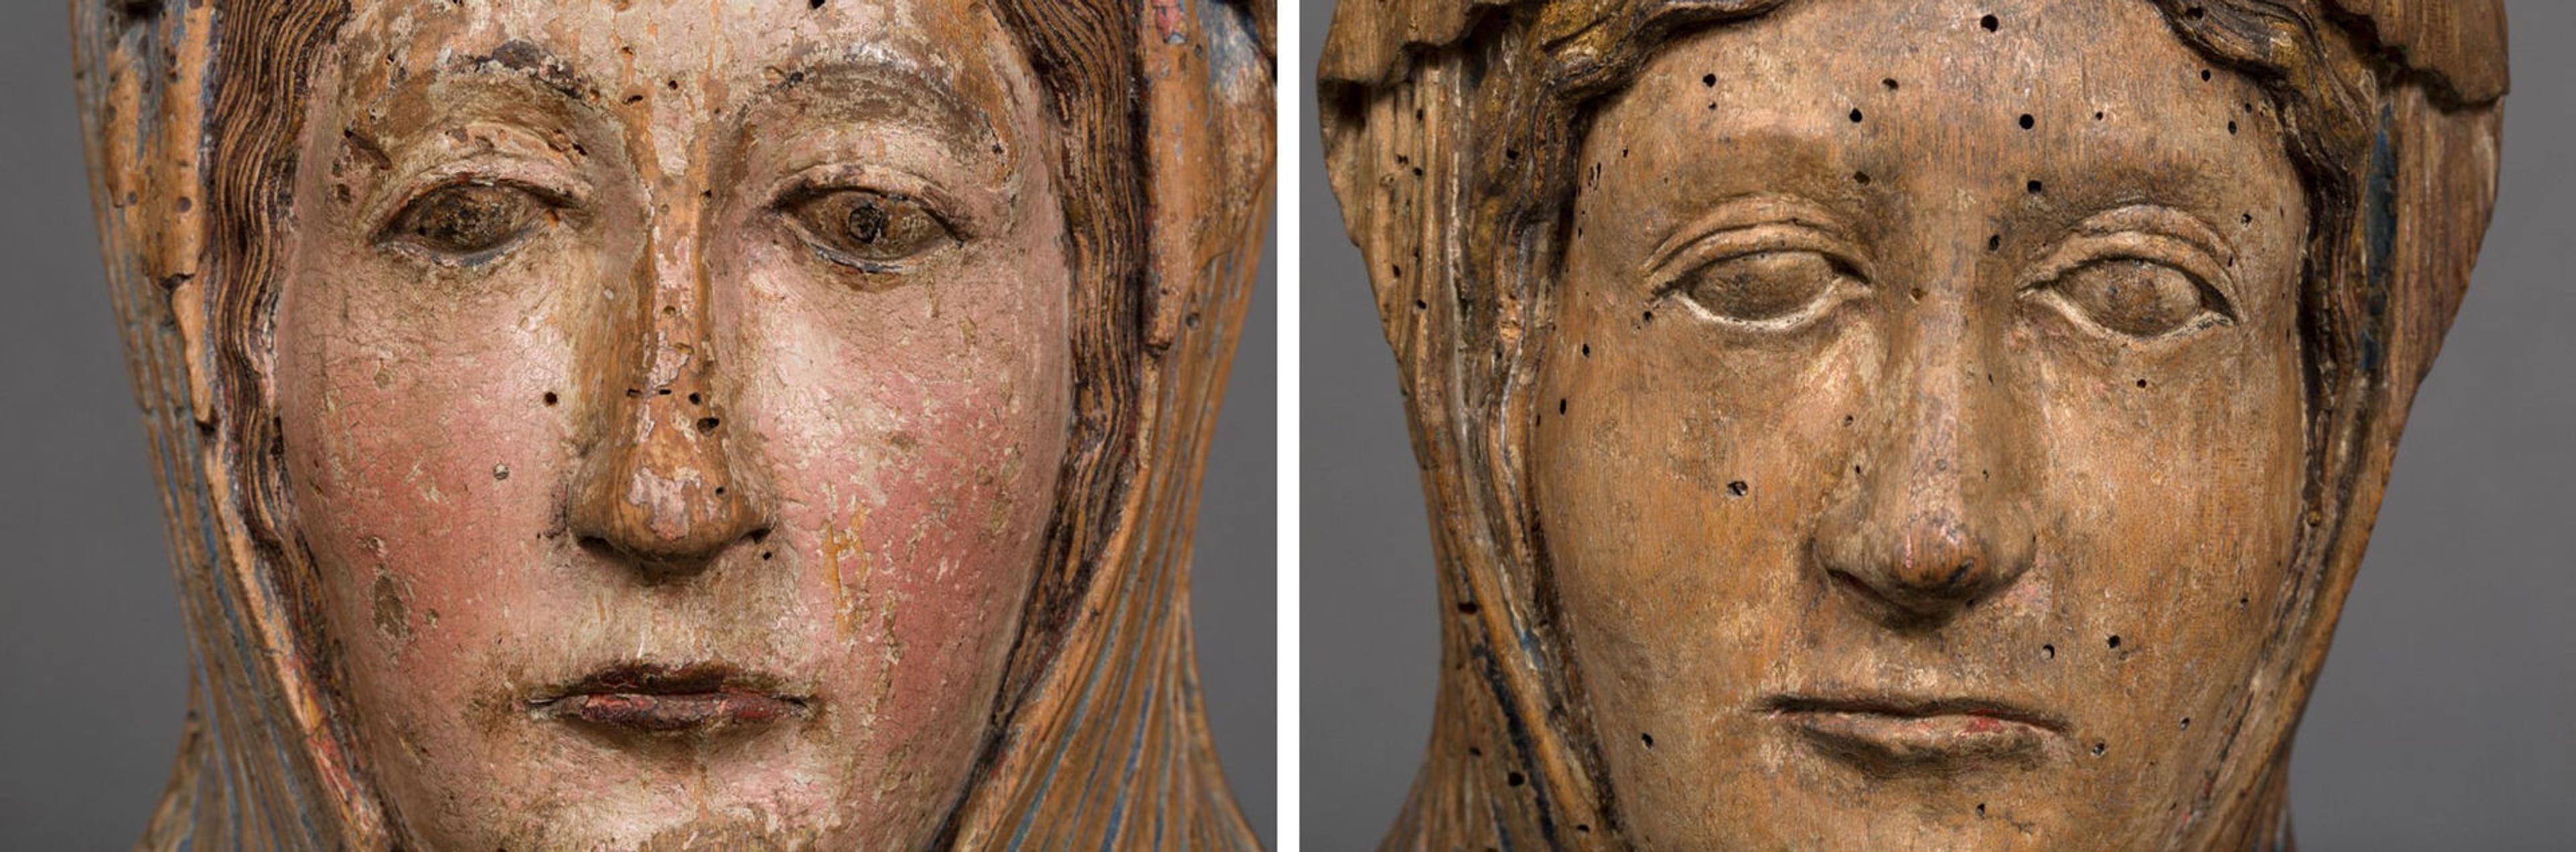 Detail views of two twelfth-century sculptures of the Virgin, here showing close-up views of their faces